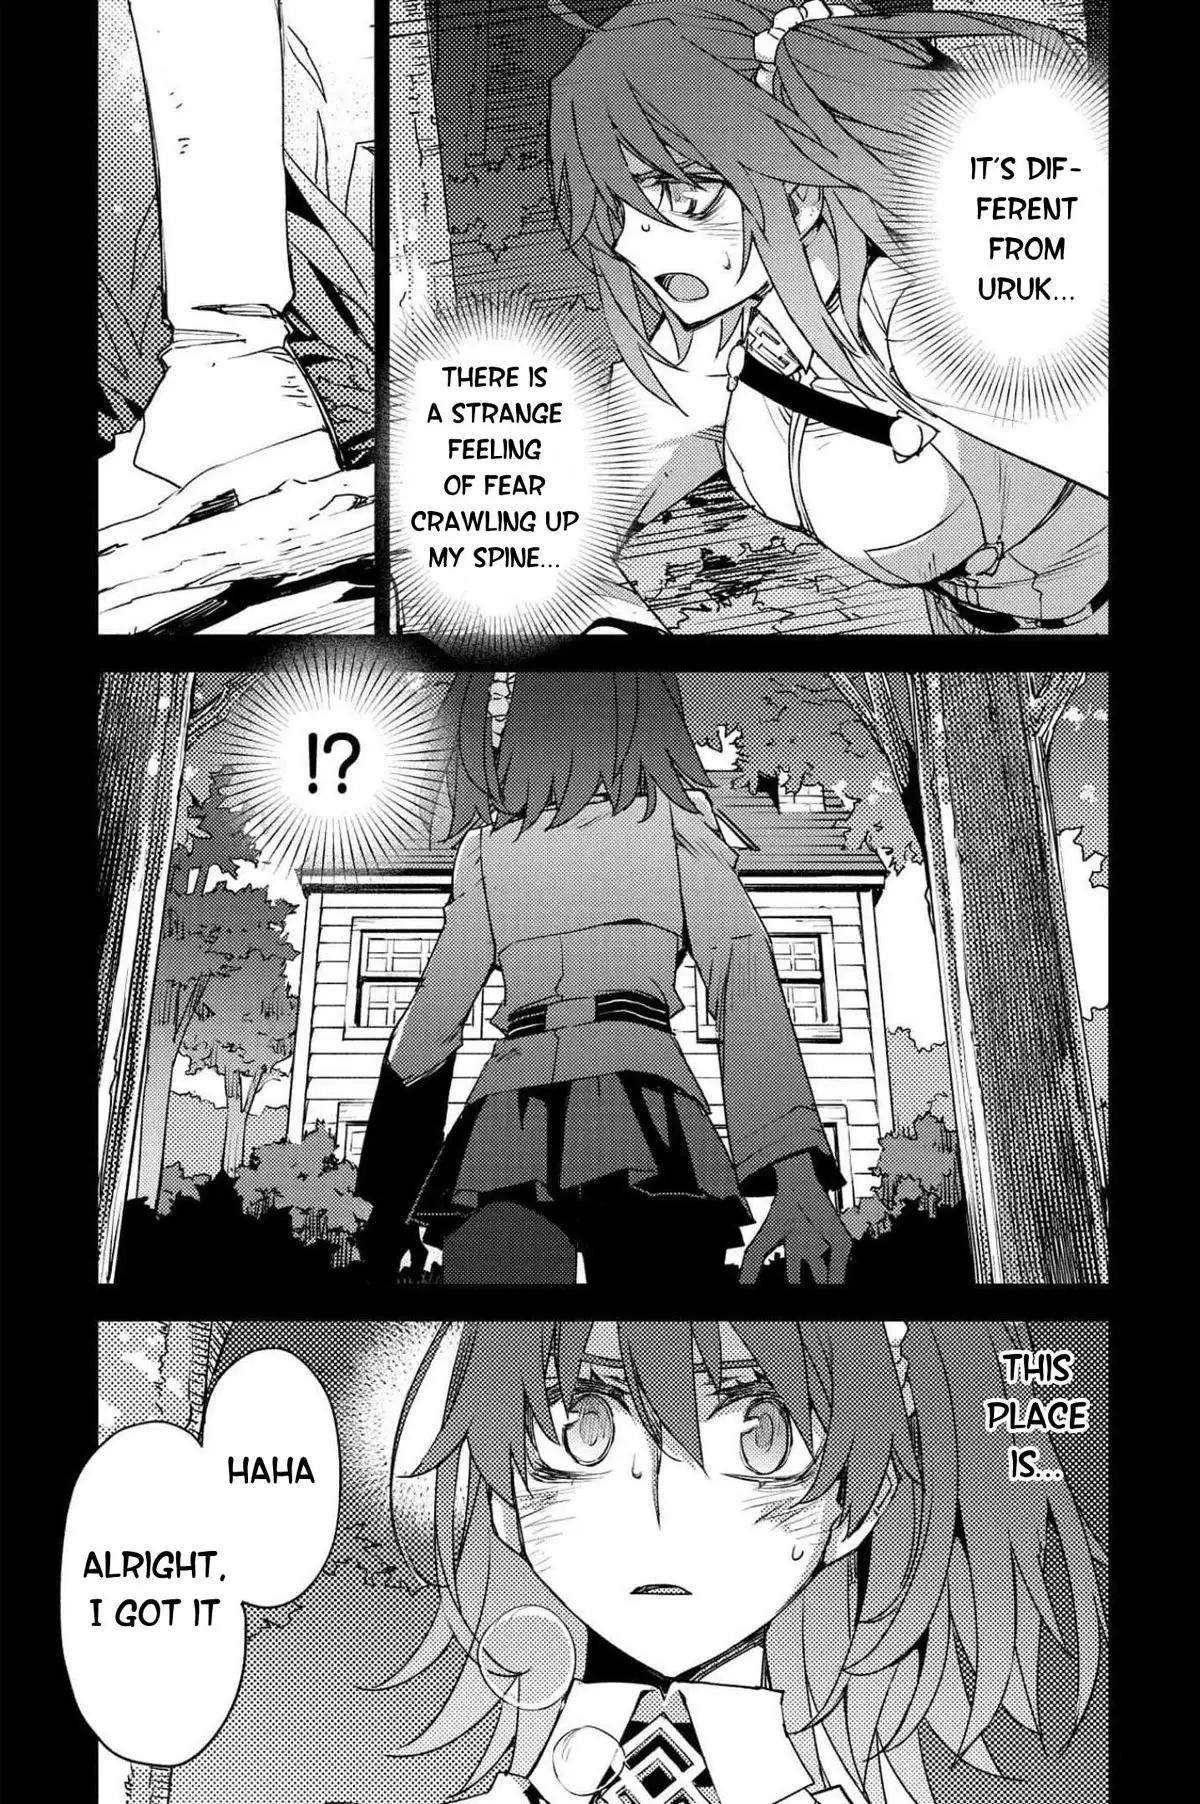 Fate/grand Order: Epic Of Remnant - Subspecies Singularity Iv: Taboo Advent Salem: Salem Of Heresy - 26 page 13-5f0aba2b